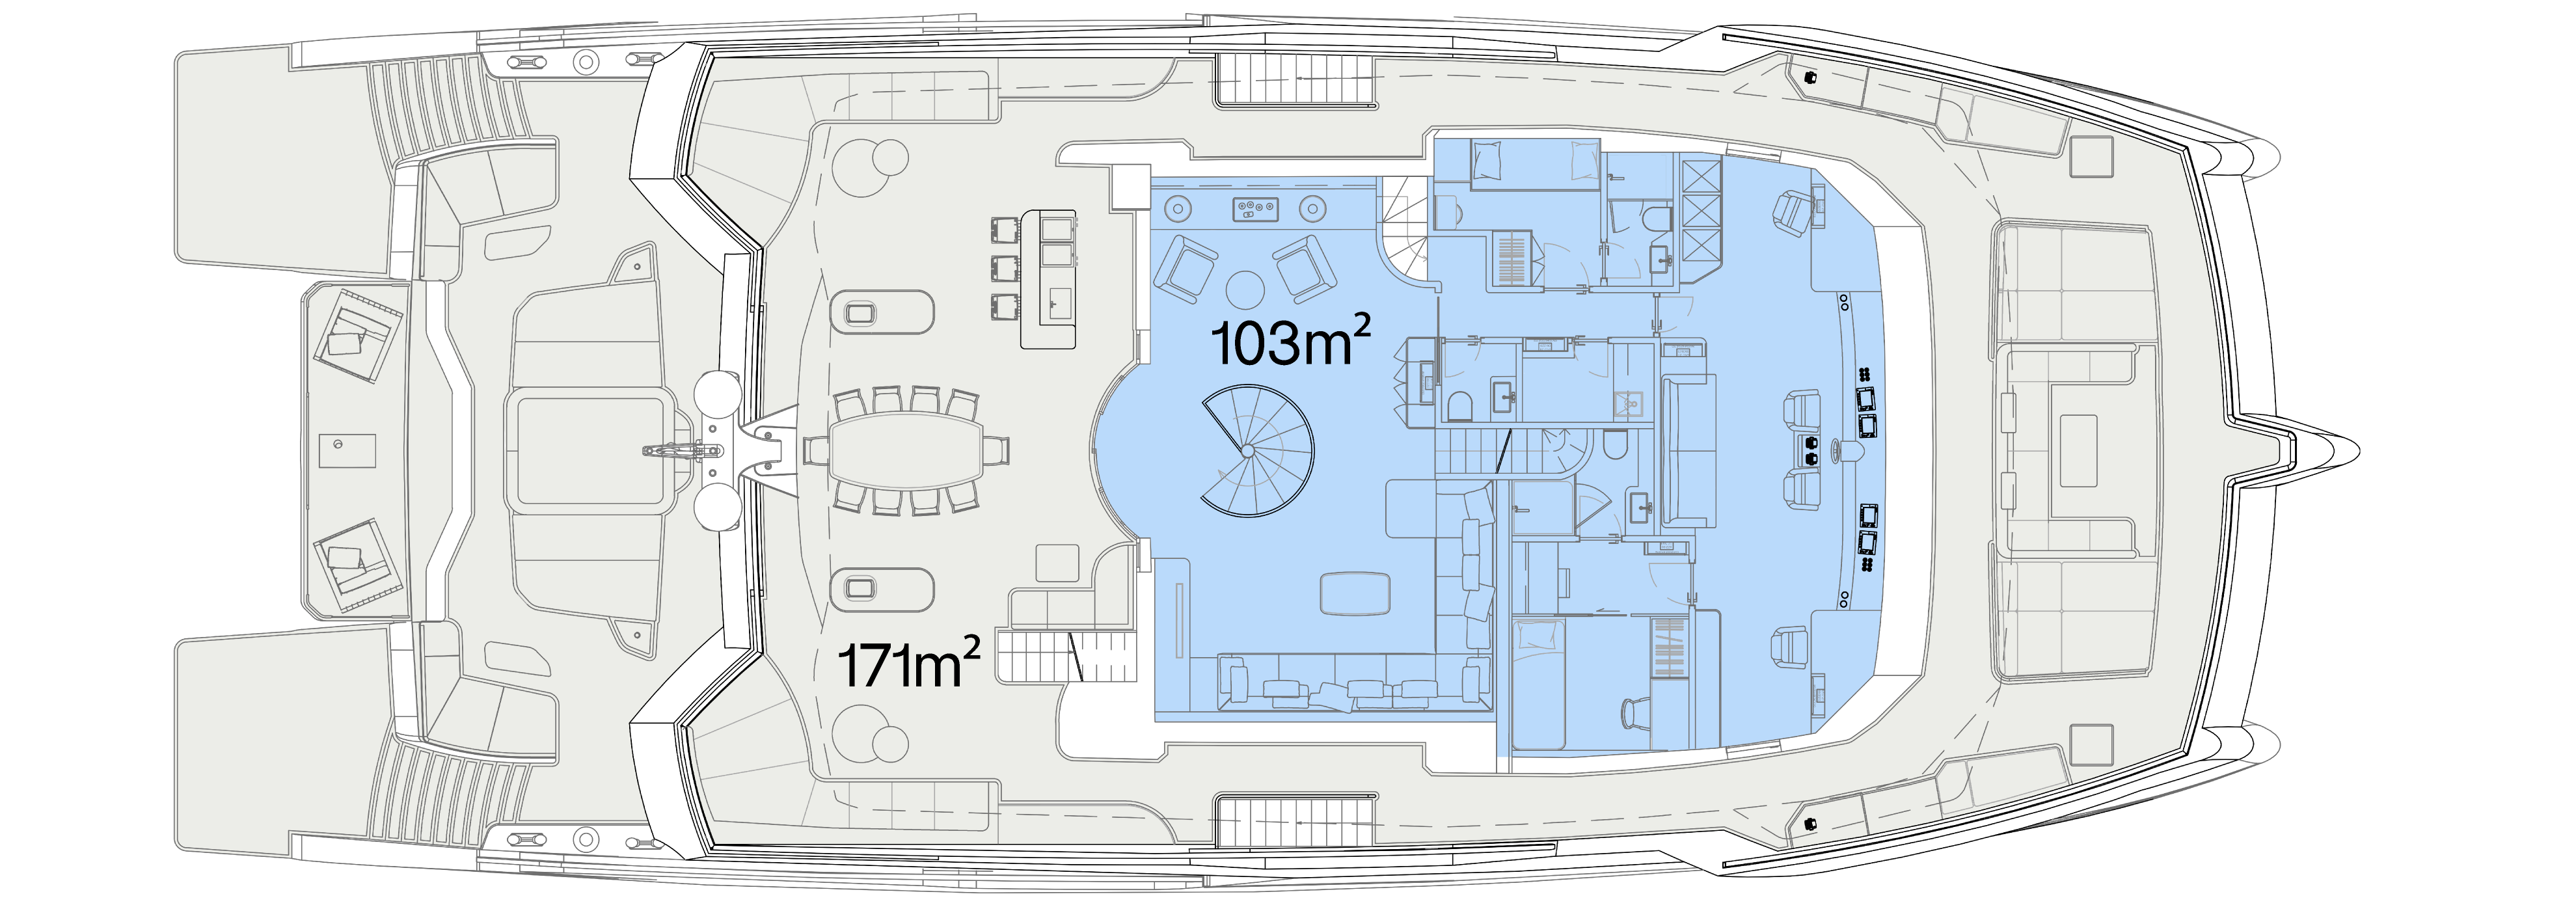 Upper deck plan of a Silent 120 yacht with measures